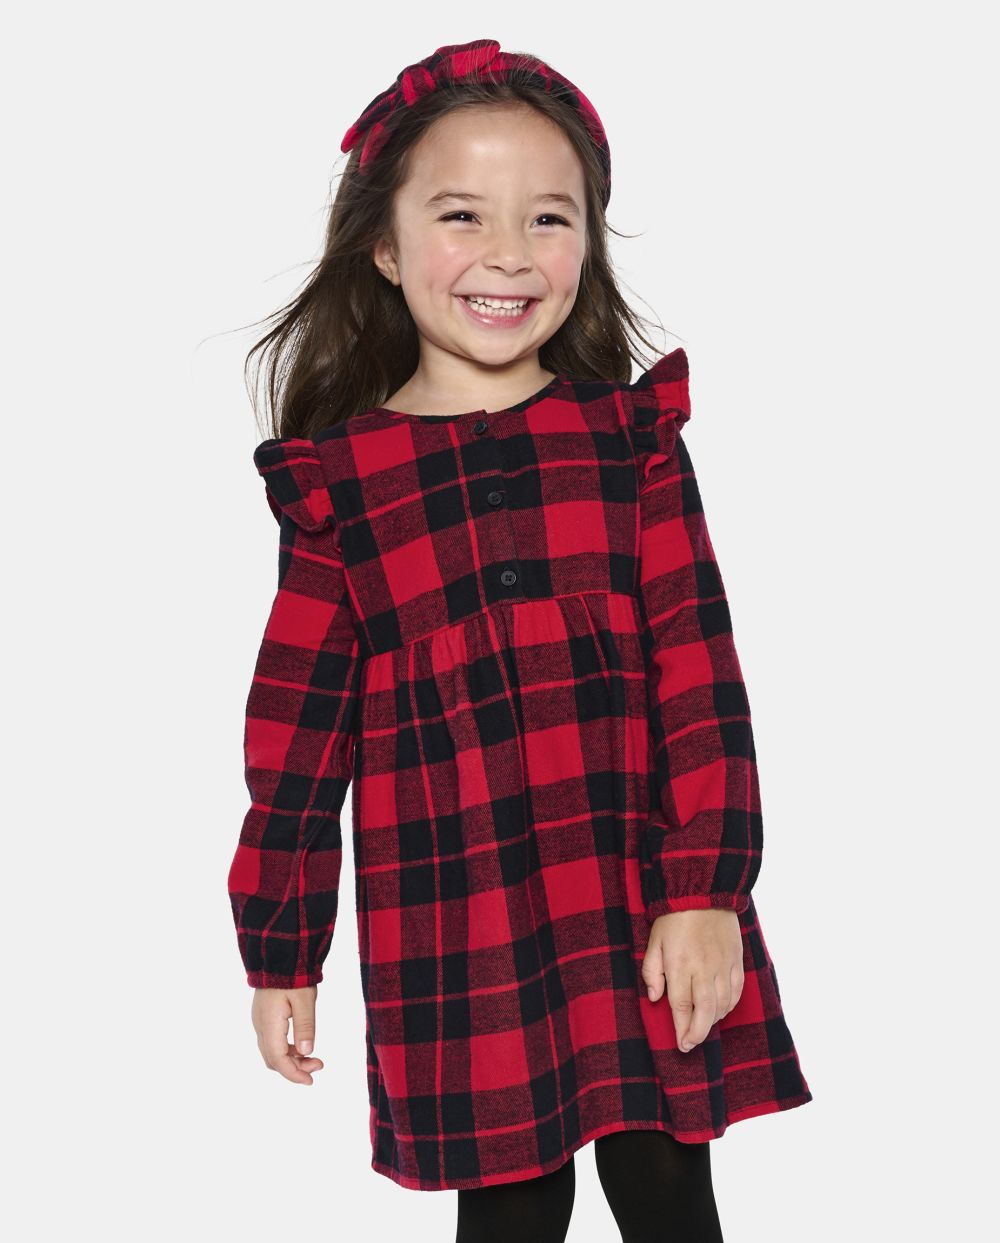 Toddler Baby Crew Neck Above the Knee Flutter Long Sleeves Plaid Print Button Front Shirt Dress